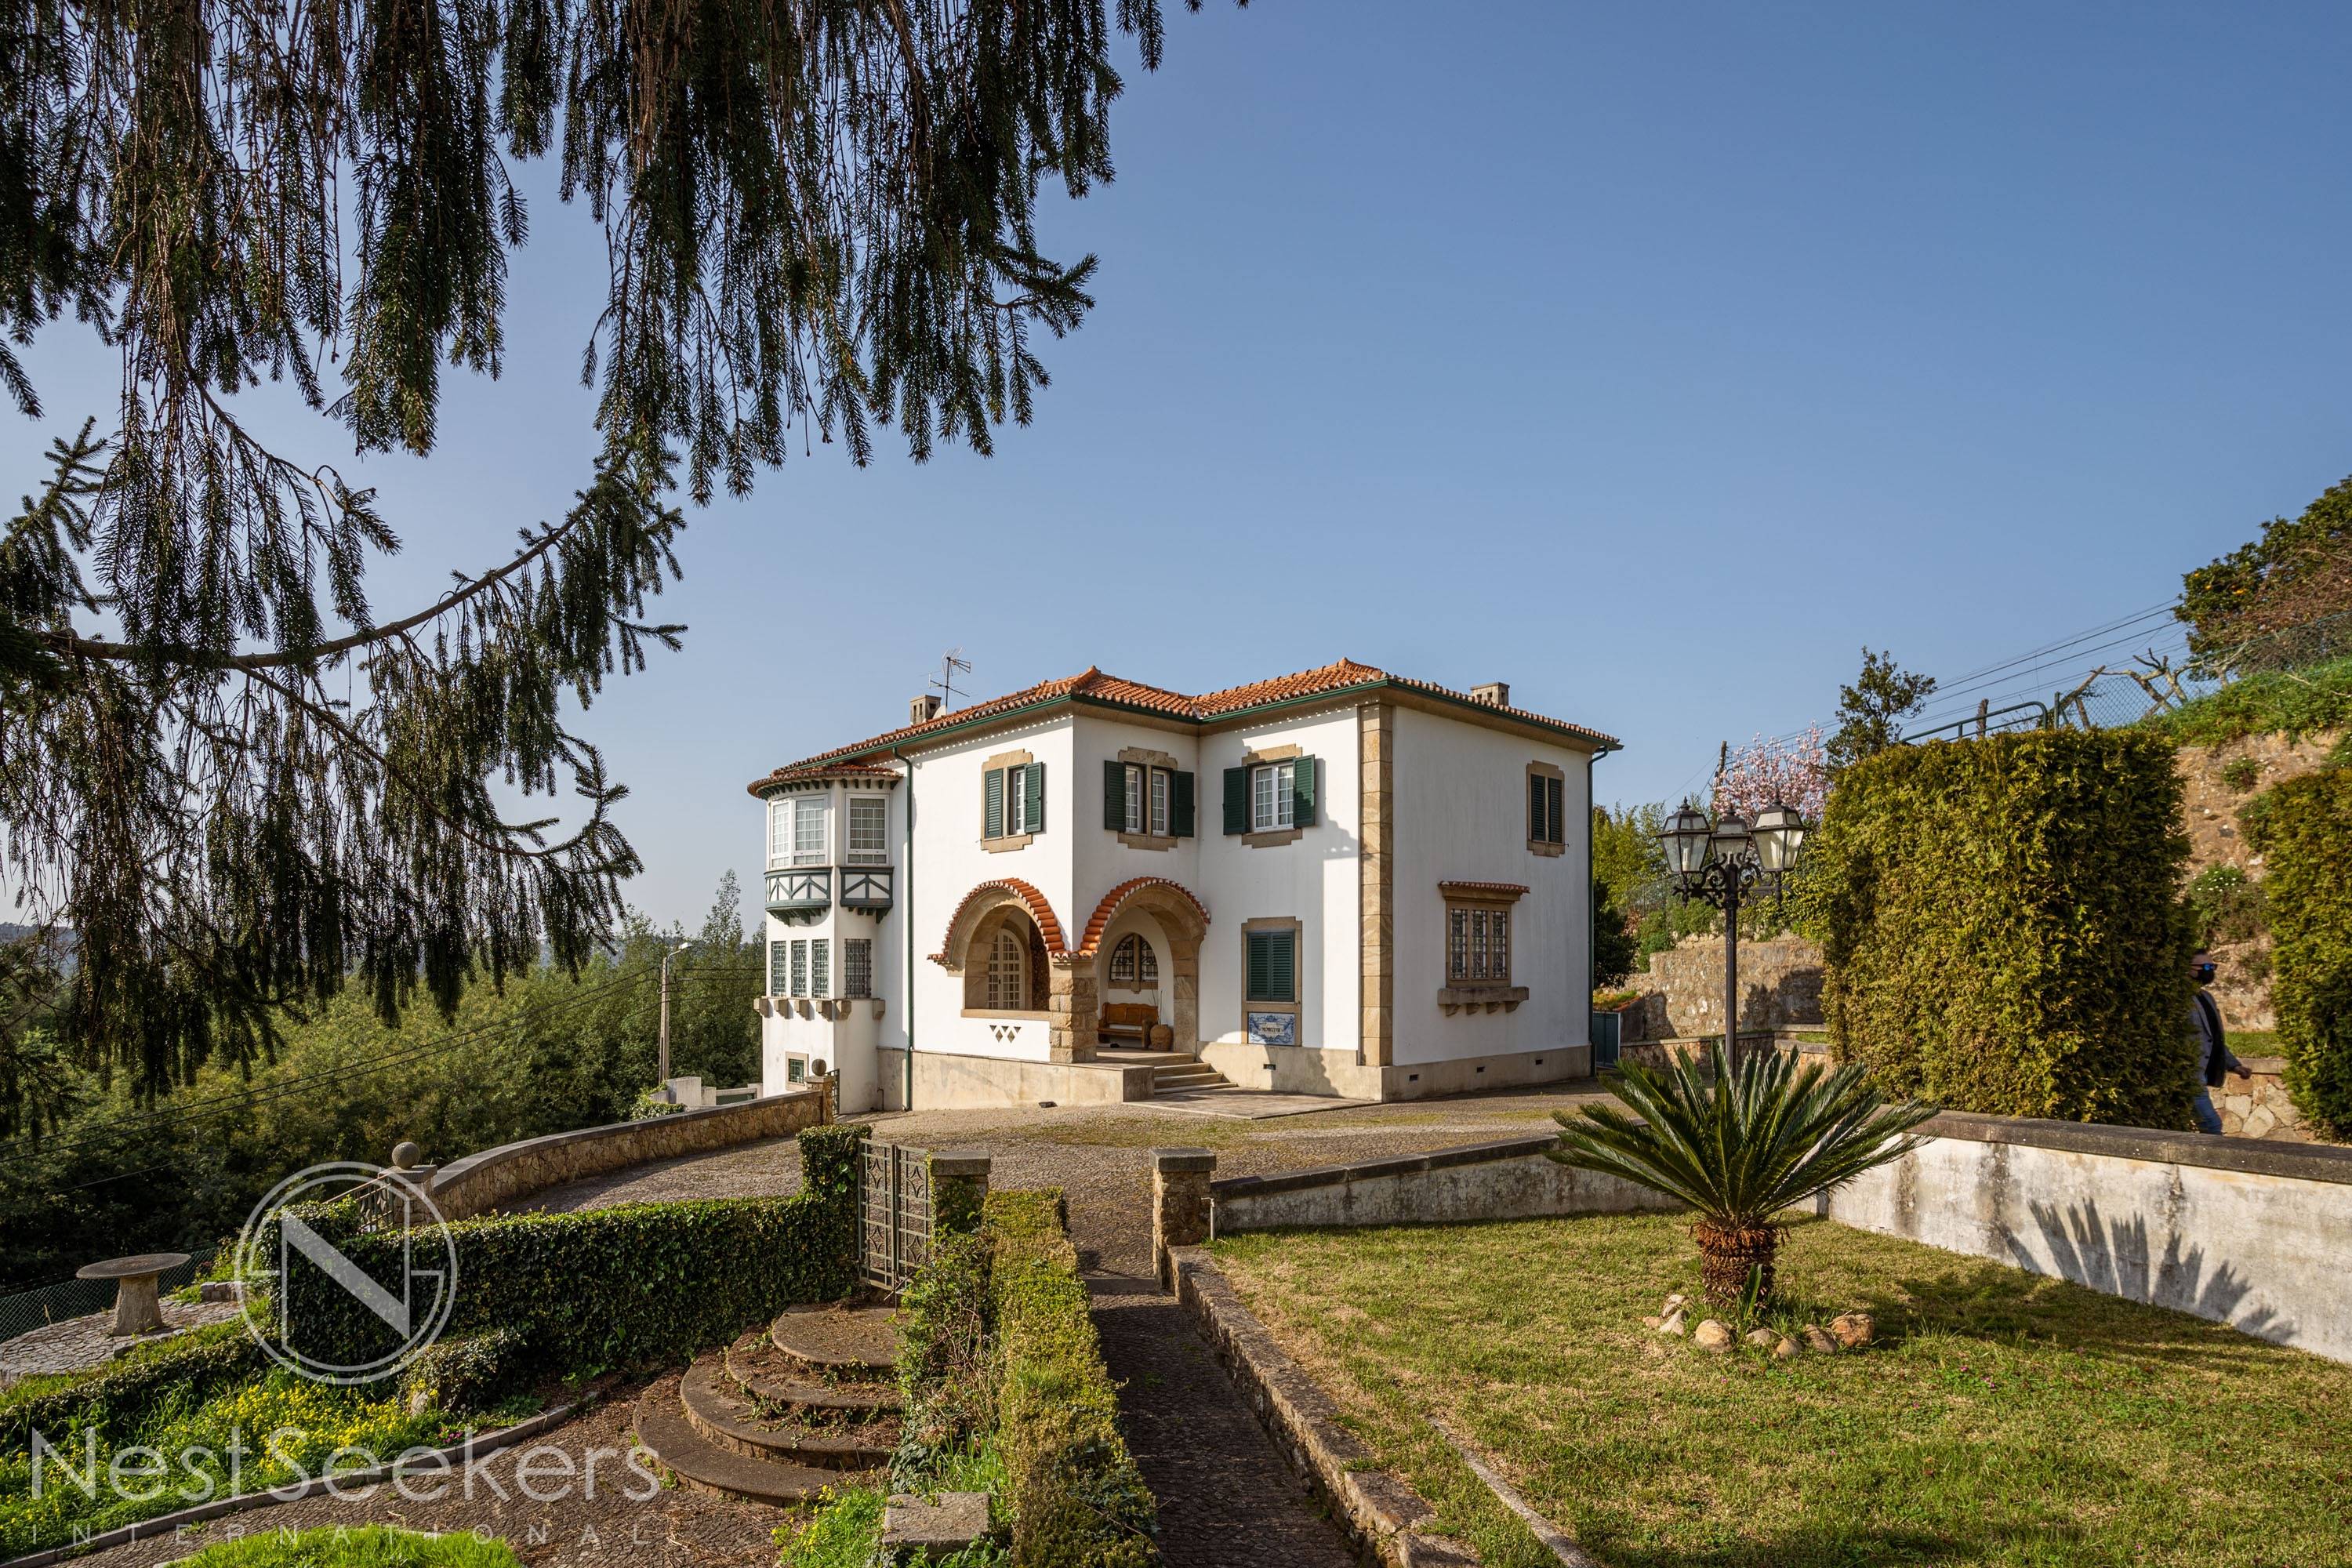 A Timeless and Majestic Manor with 11 bedrooms, 14 acres, in Portugal